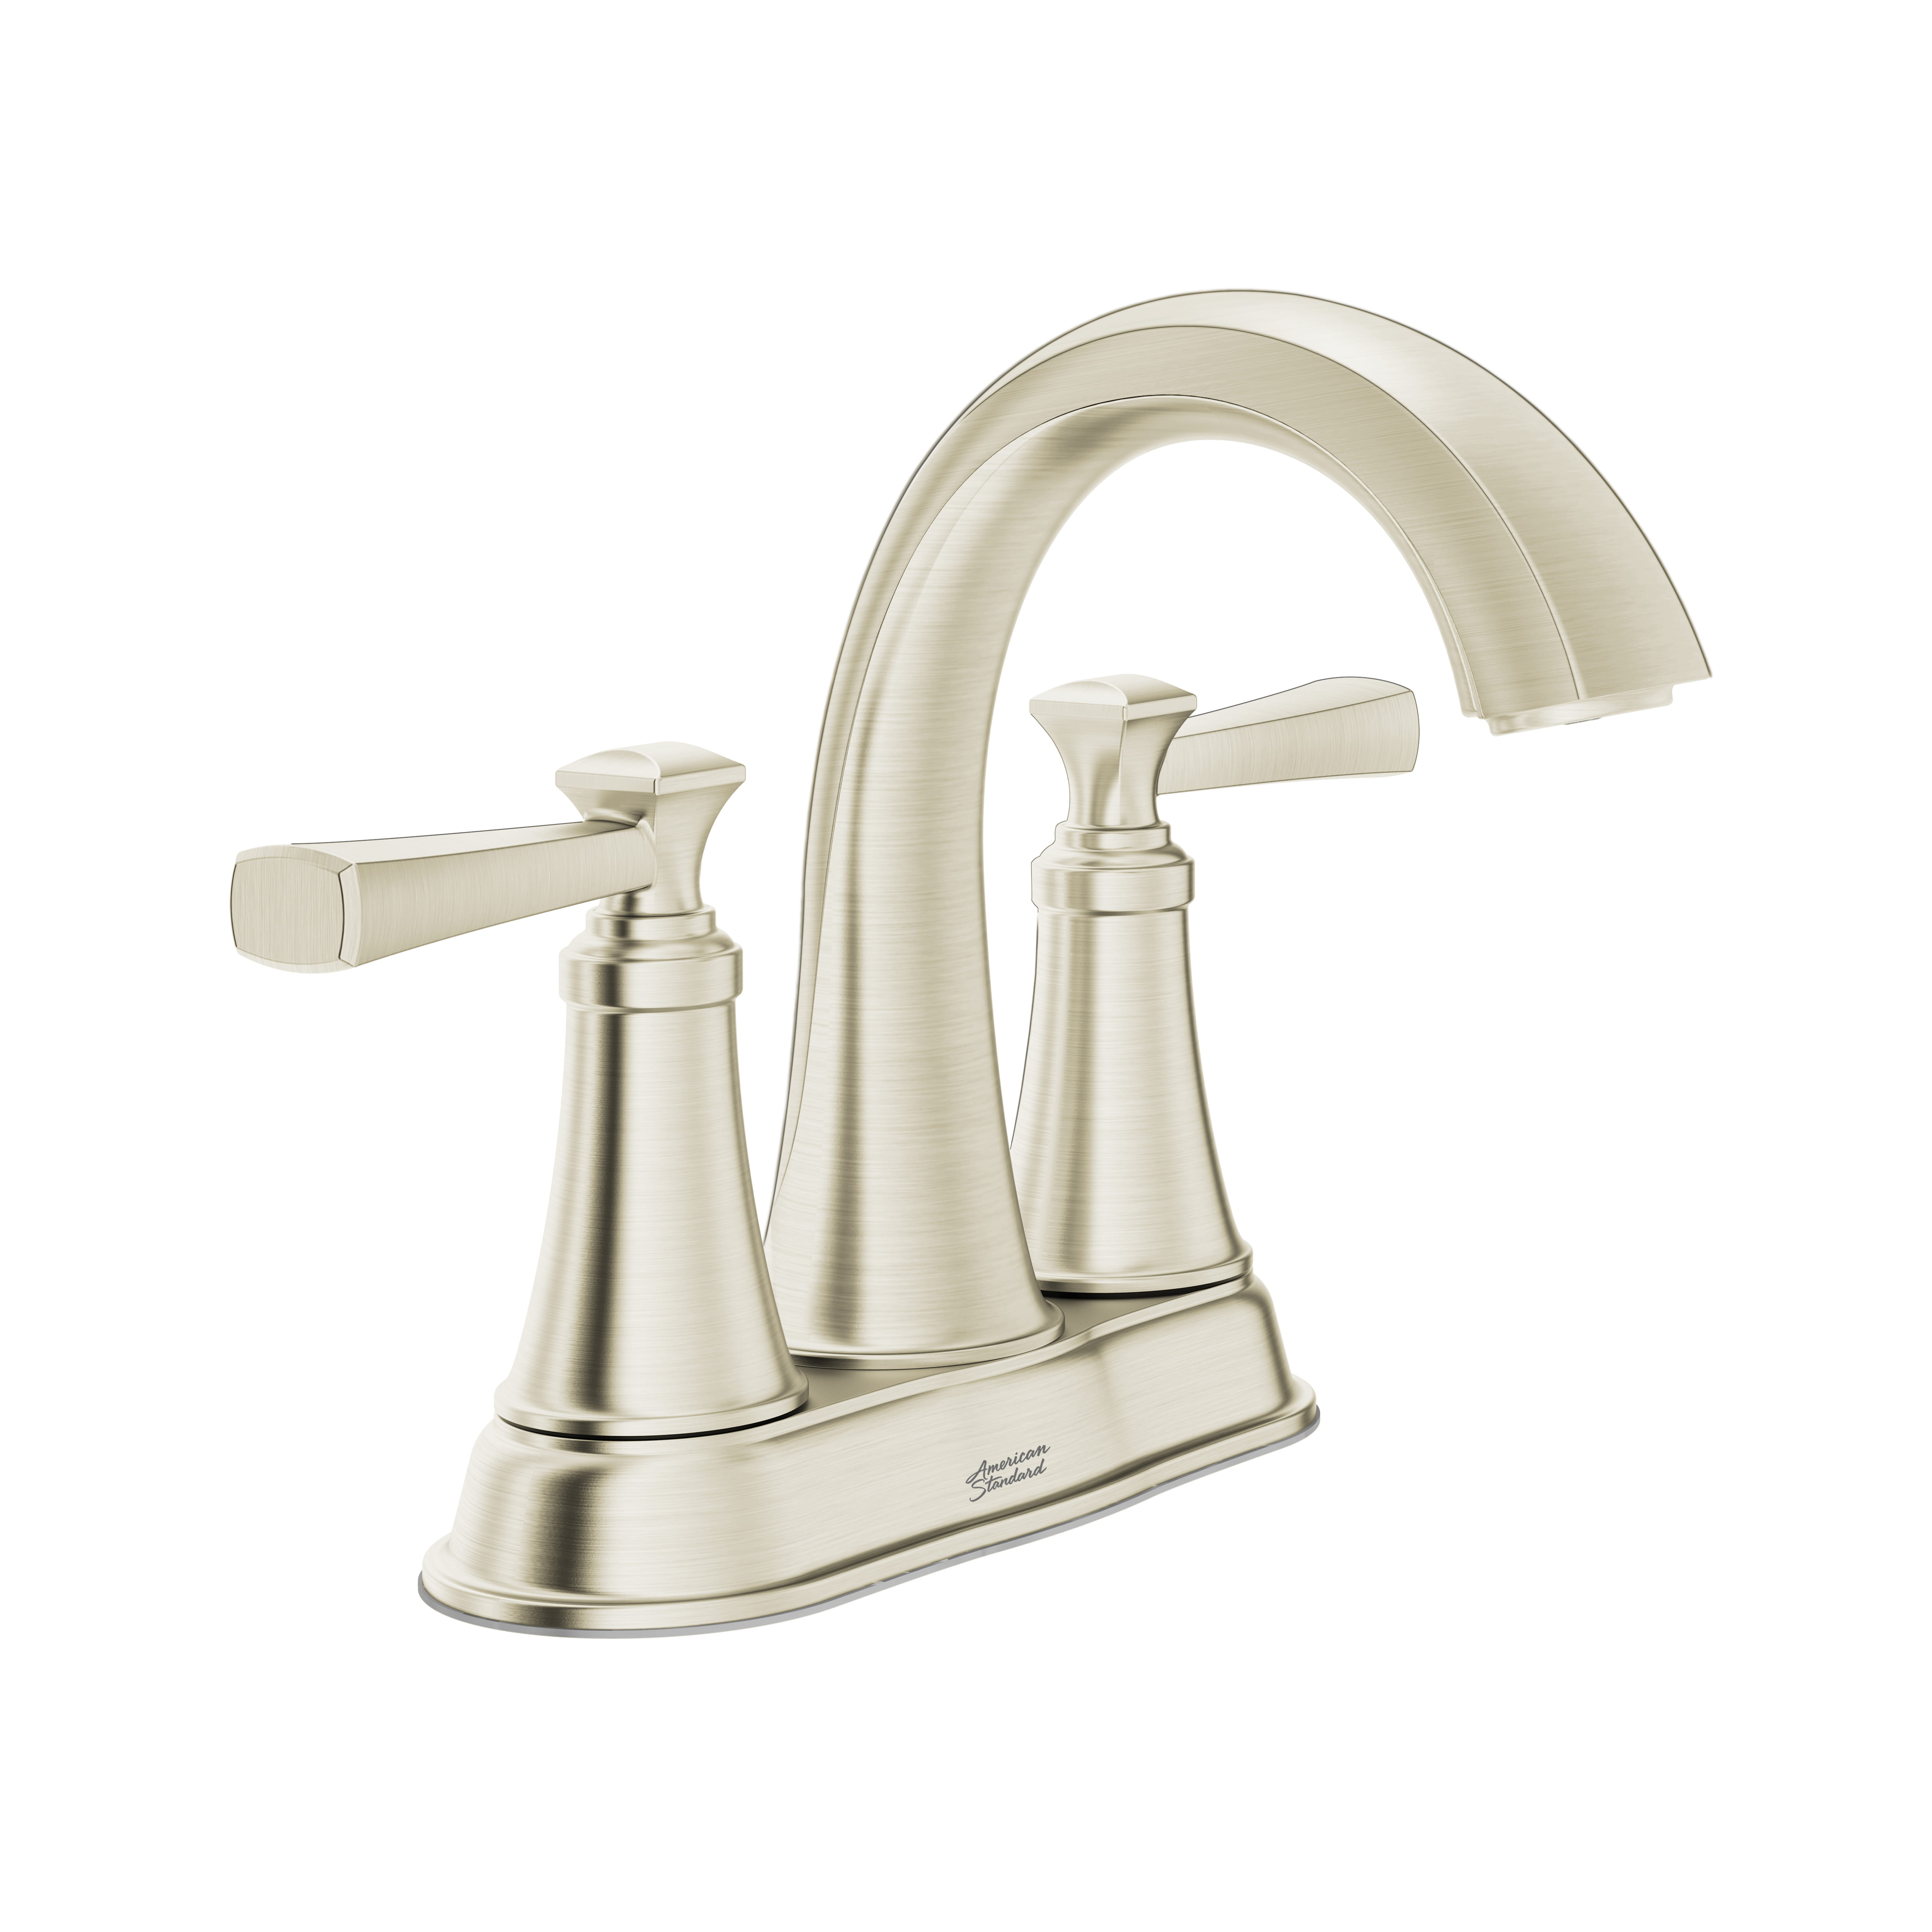 Rumson 4 In Centerset 2 Handle Bathroom Faucet 12 GPM with Lever Handles BRUSHED NICKEL